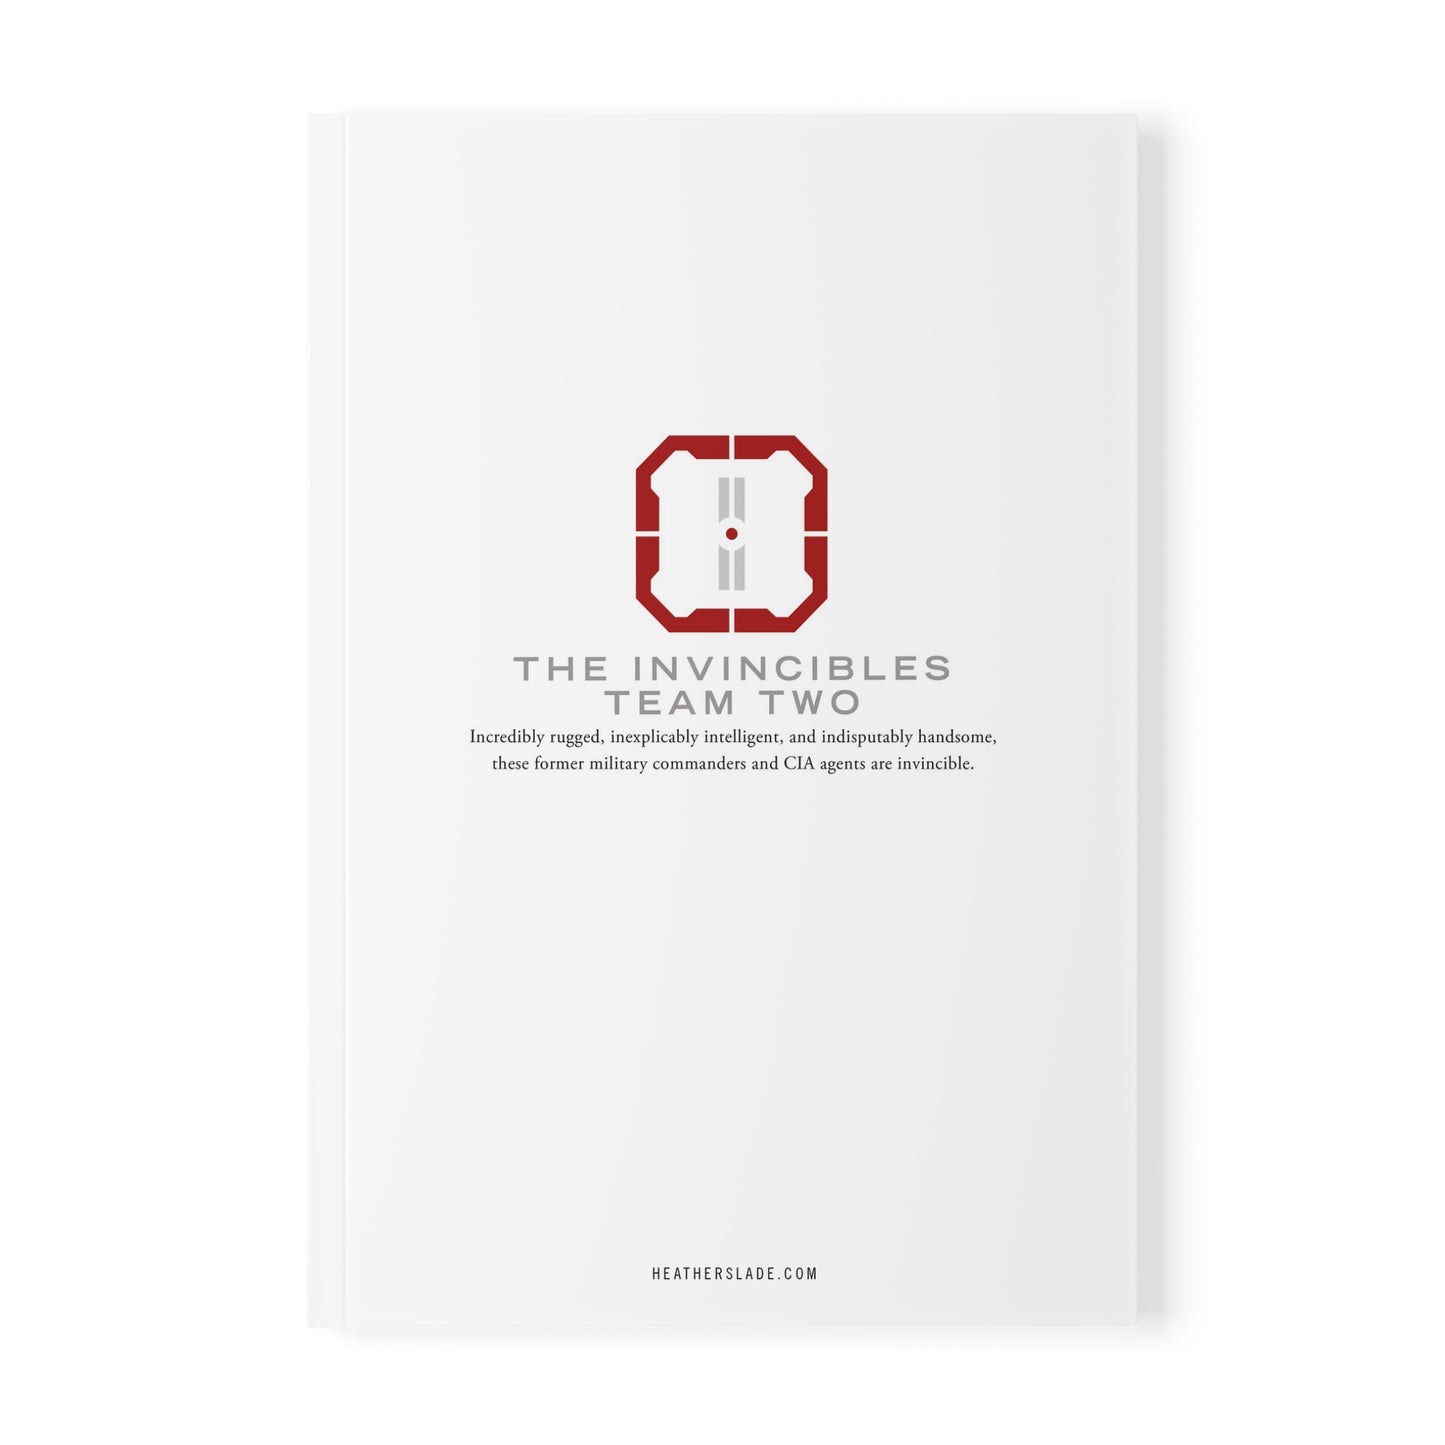 The Invincibles Team Two Softcover Notebook